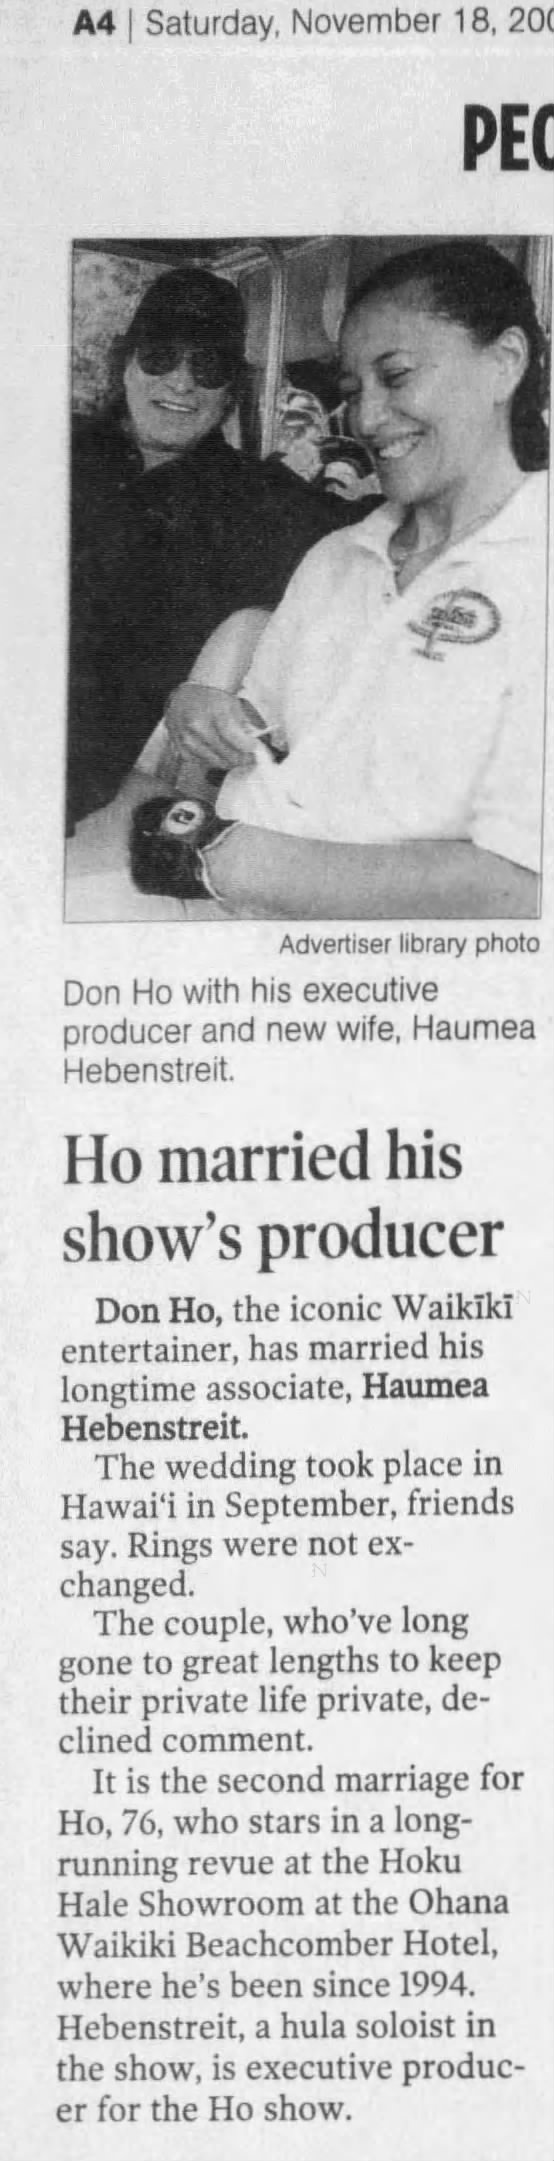 Don Ho Marries his show's producer Haumea Hebenstreit